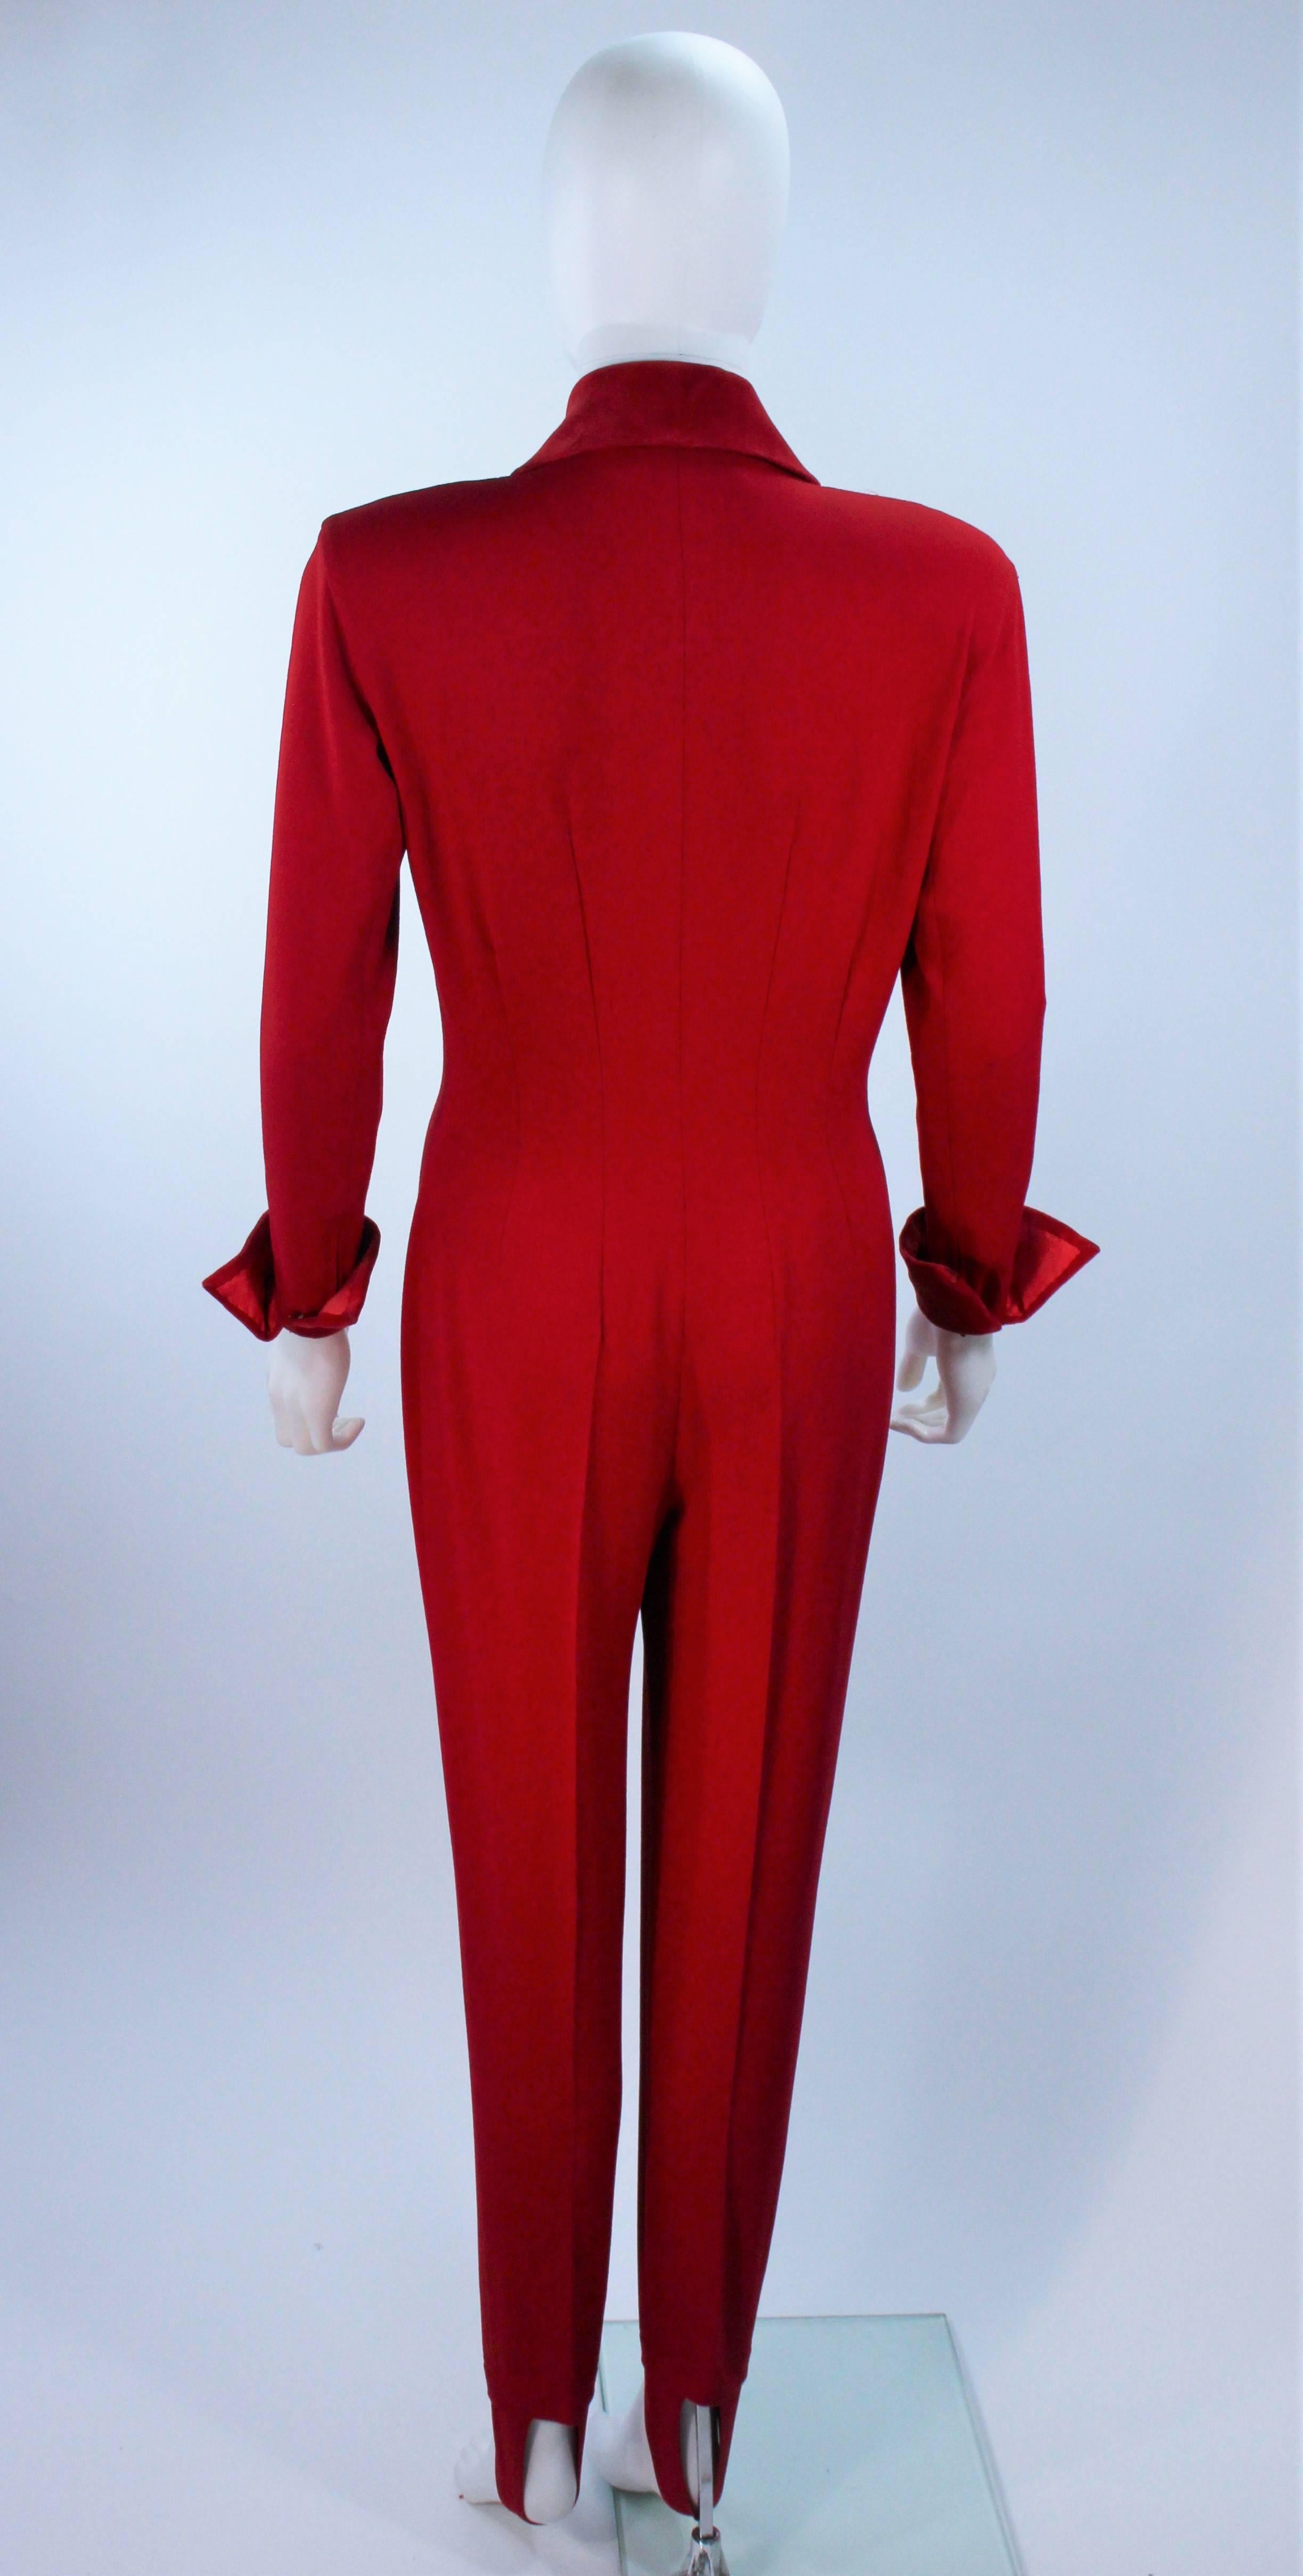 MOSCHINO Red Stretch Wool Stirrup Pantsuit with Velvet Trim Size 6-8 5